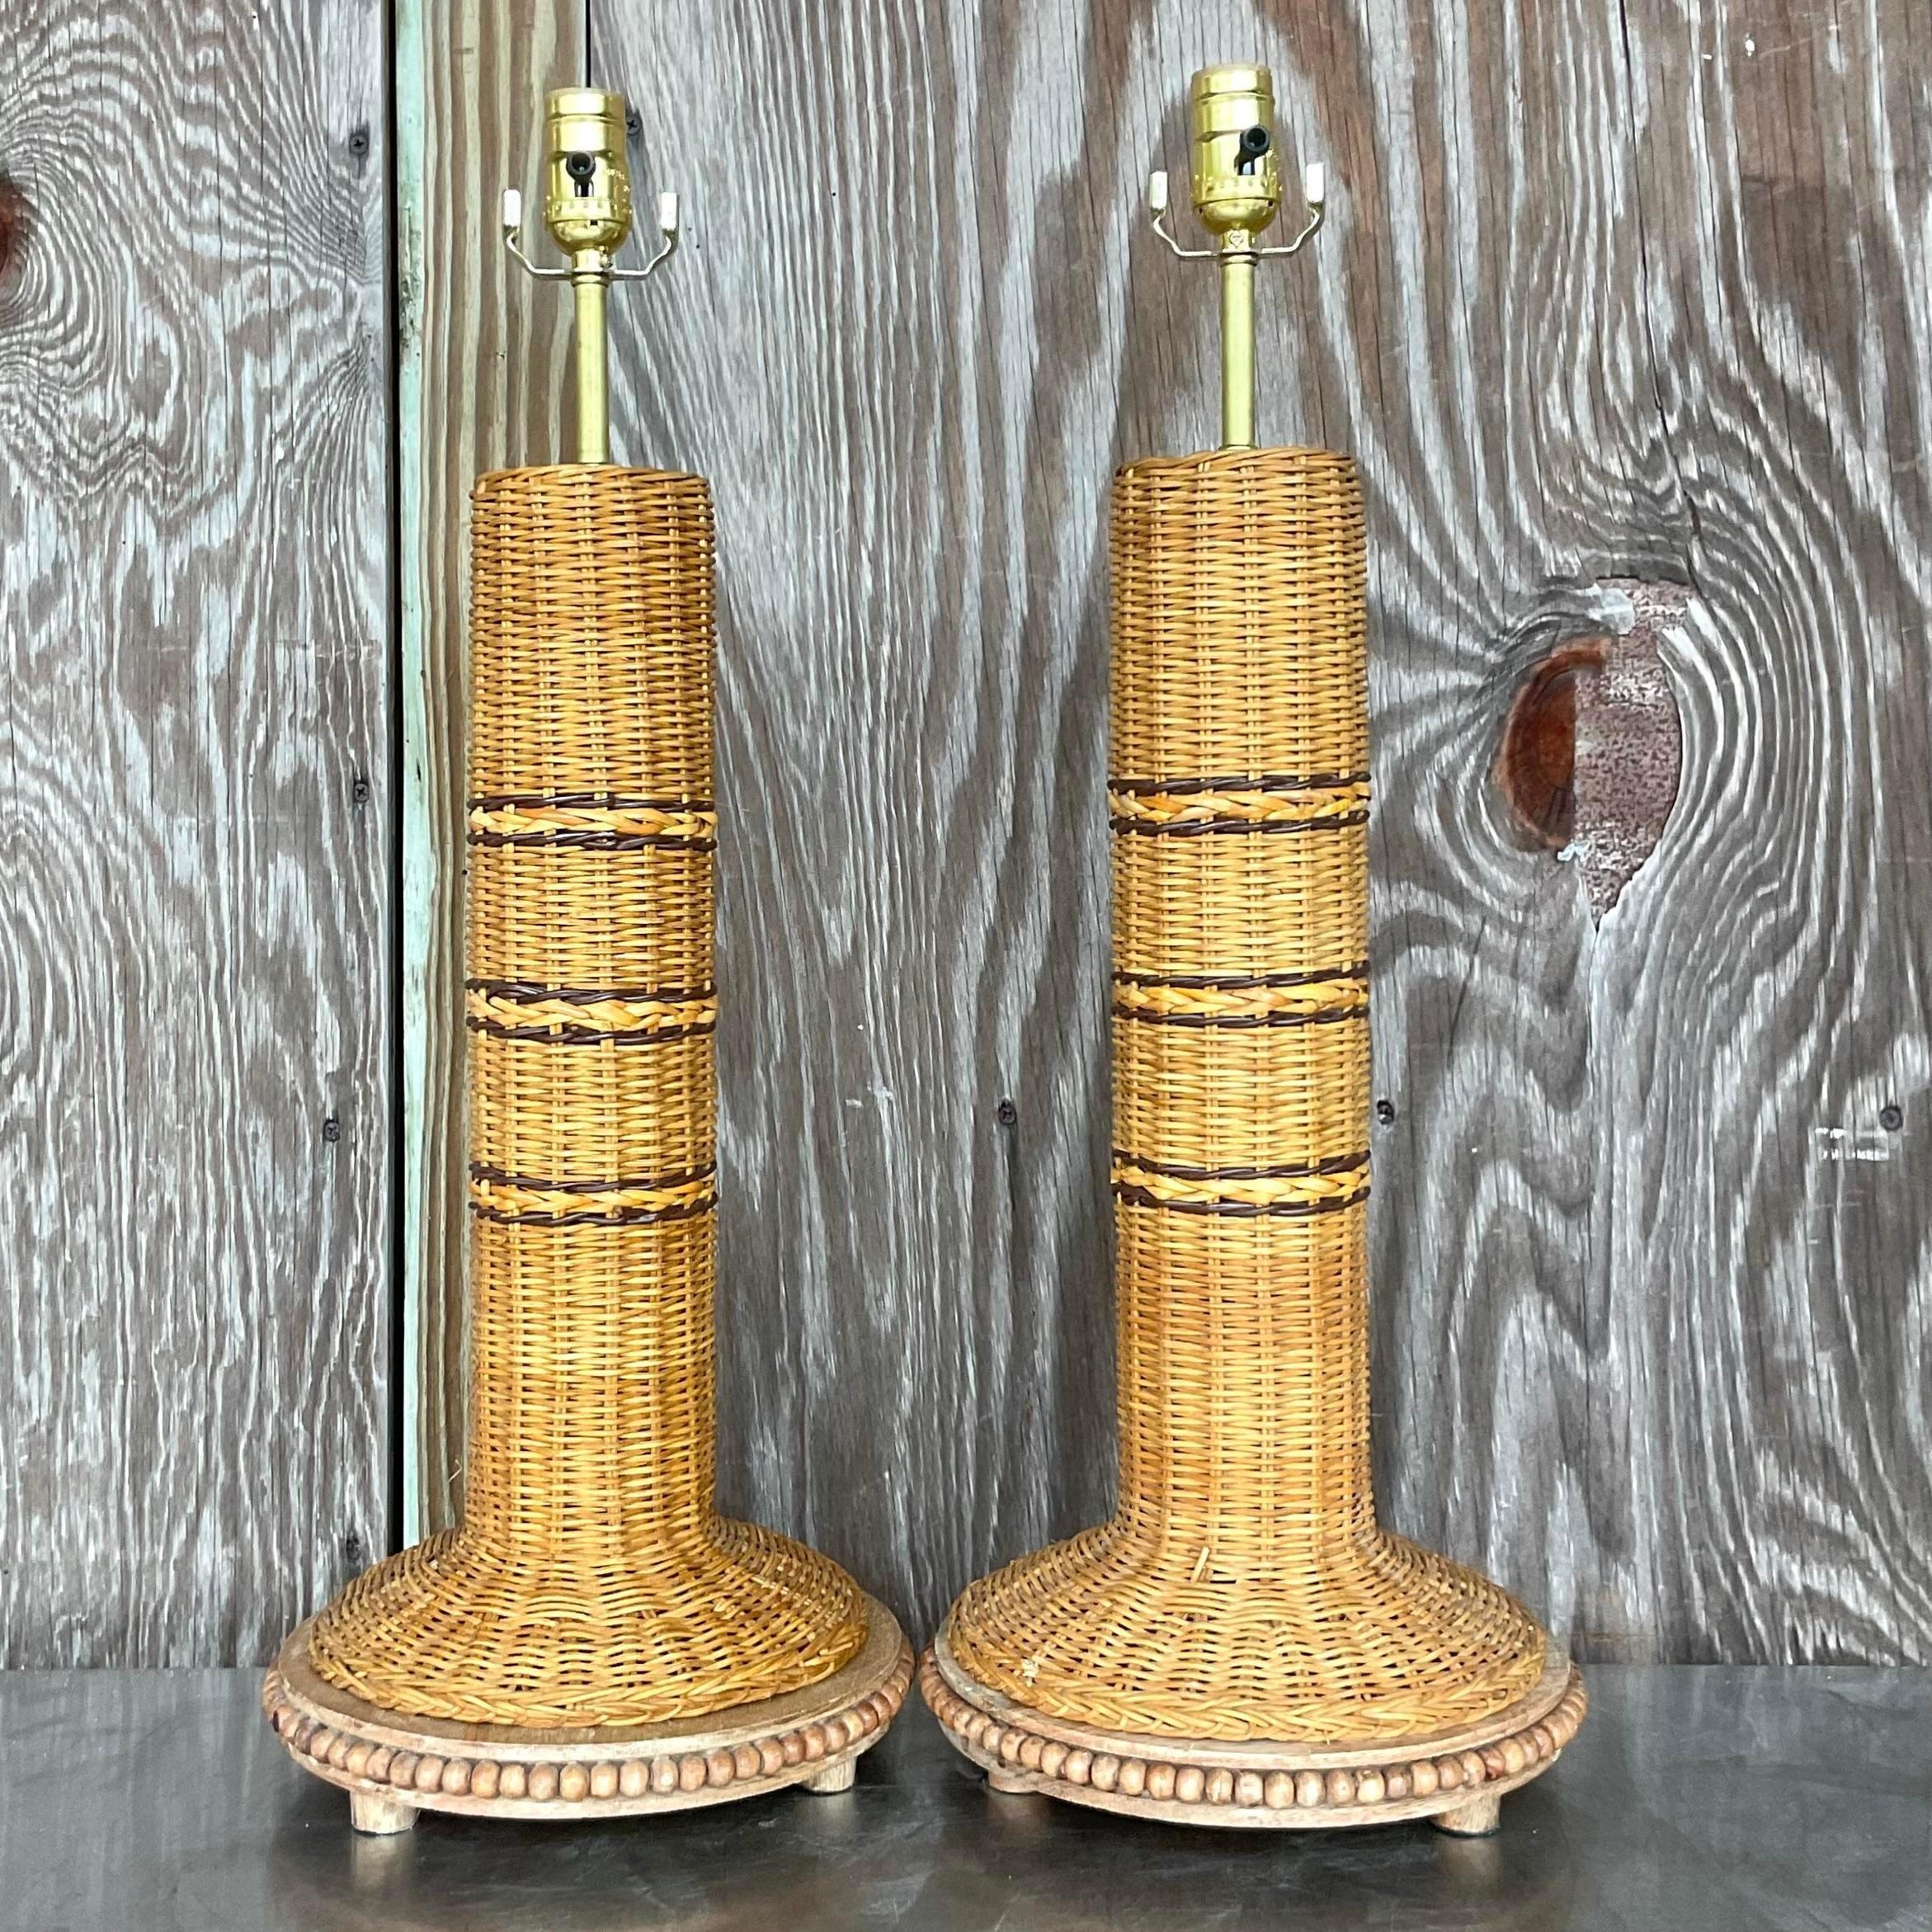 Vintage Coastal Woven Rattan Table Lamps - a Pair For Sale 1